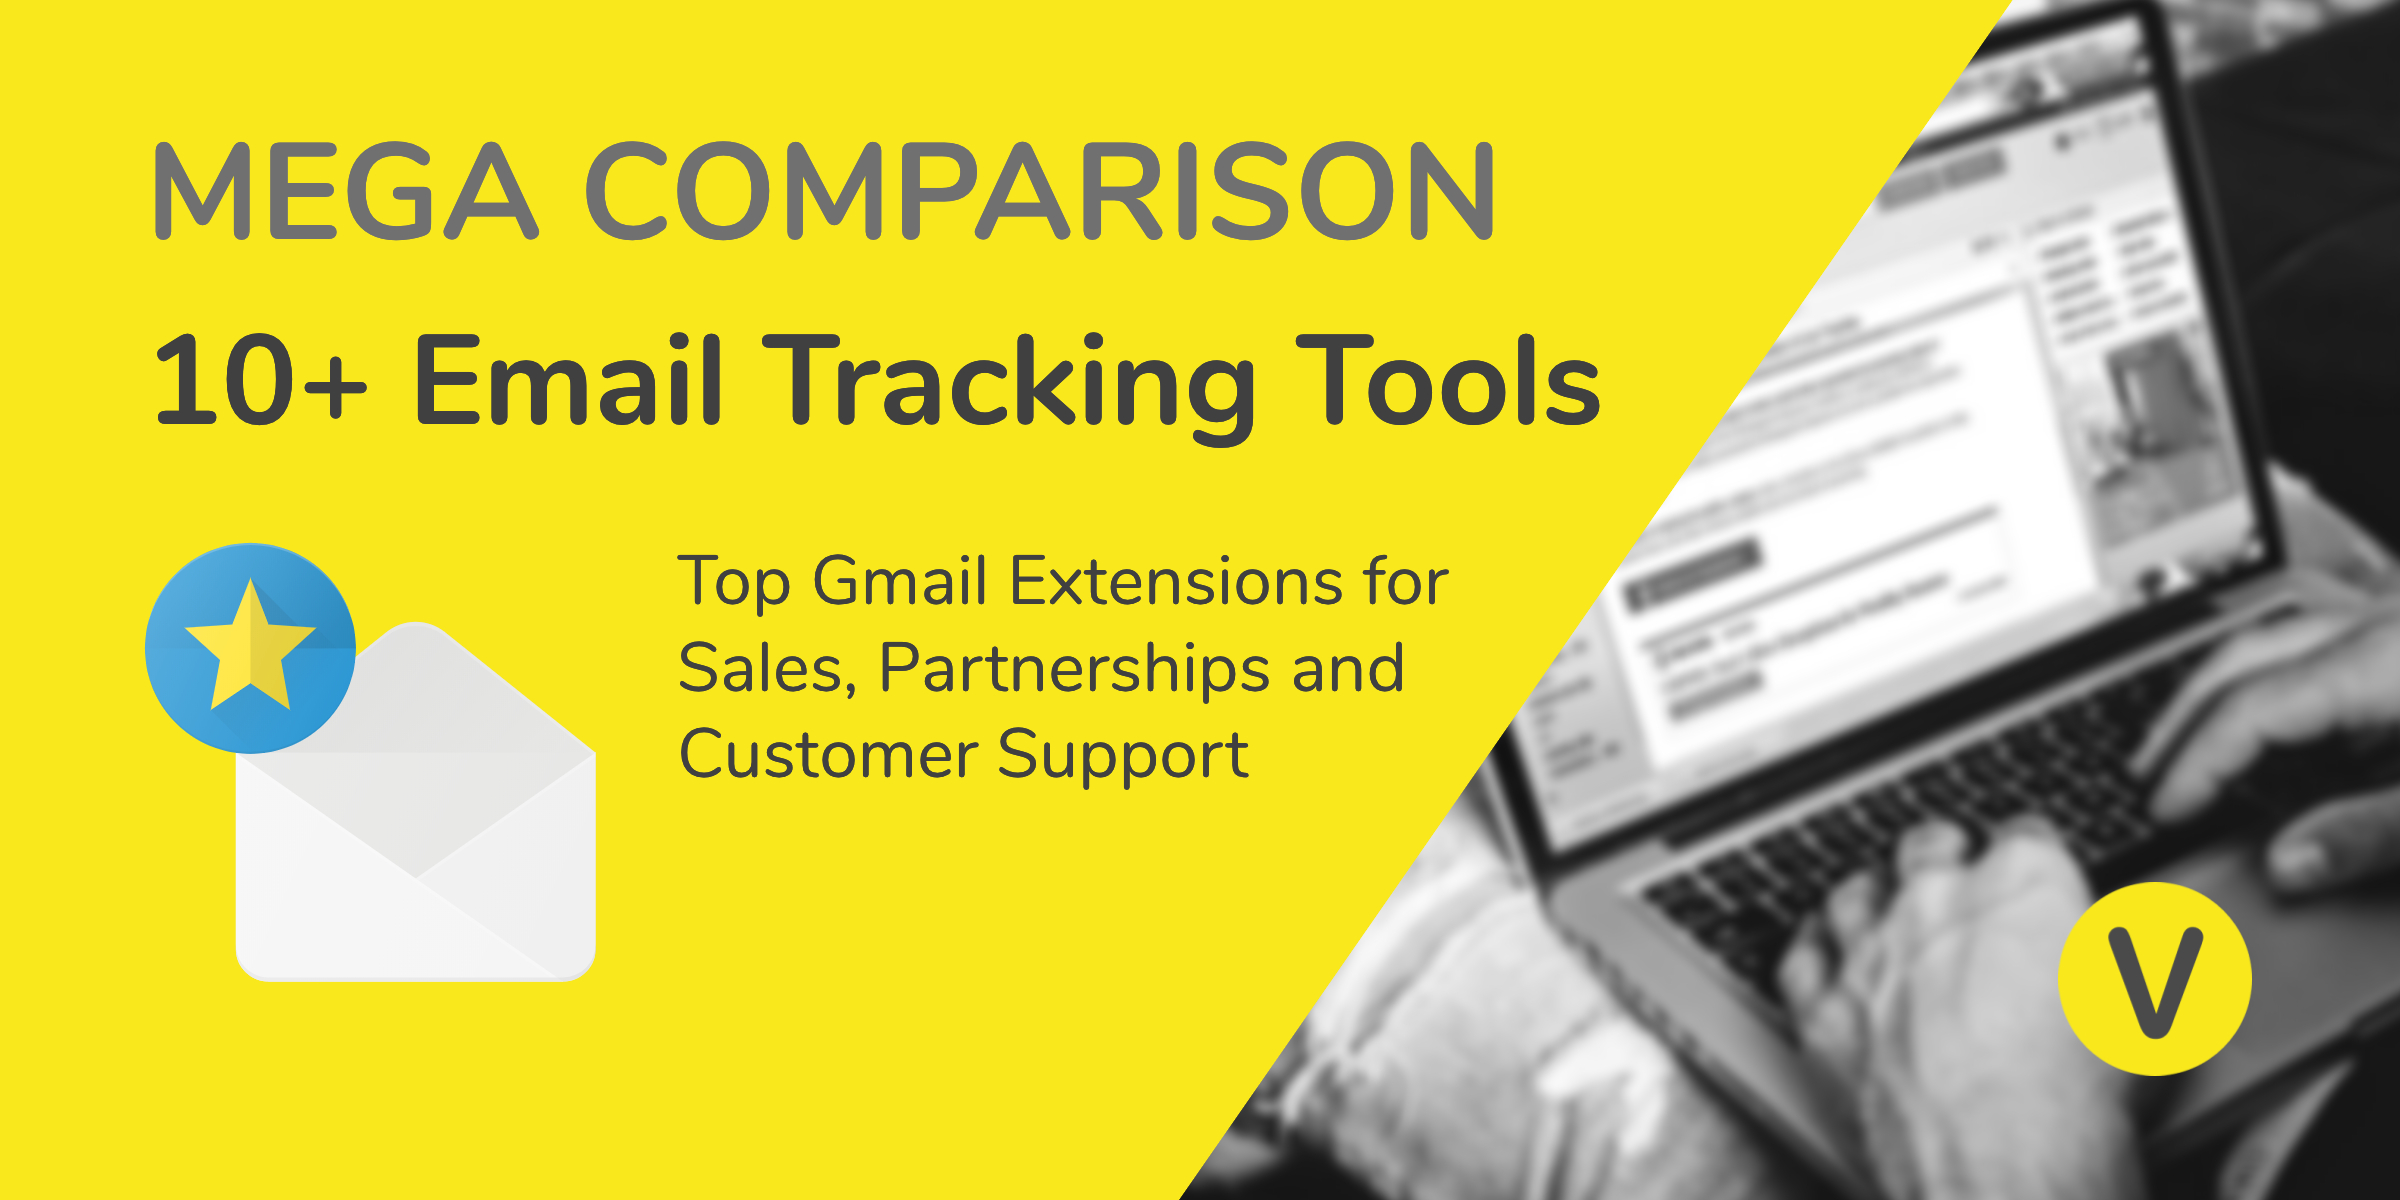 [Mega Comparison] 10+ Email Tracking Tools: Best Gmail Extensions